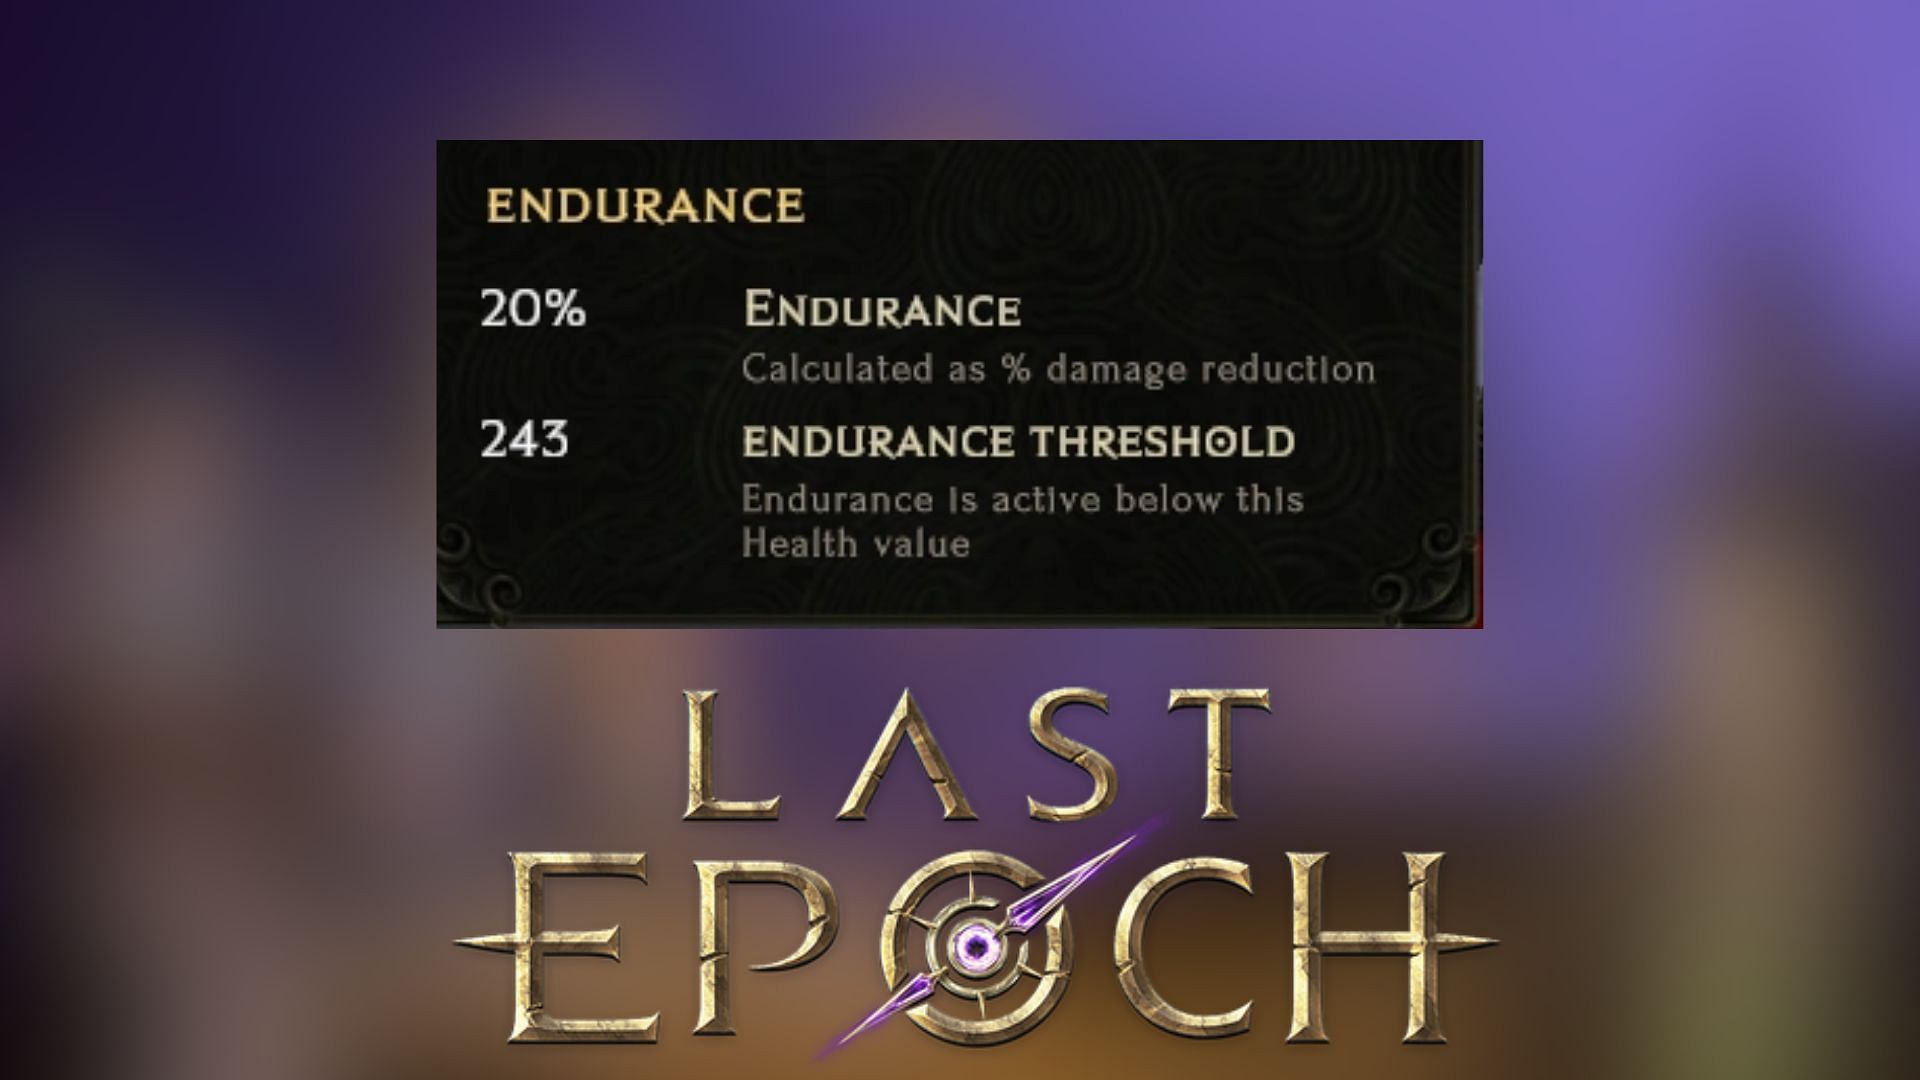 Endurance can increase your Defense and Survivability in Last Epoch (Image via Eleventh Hour Games)